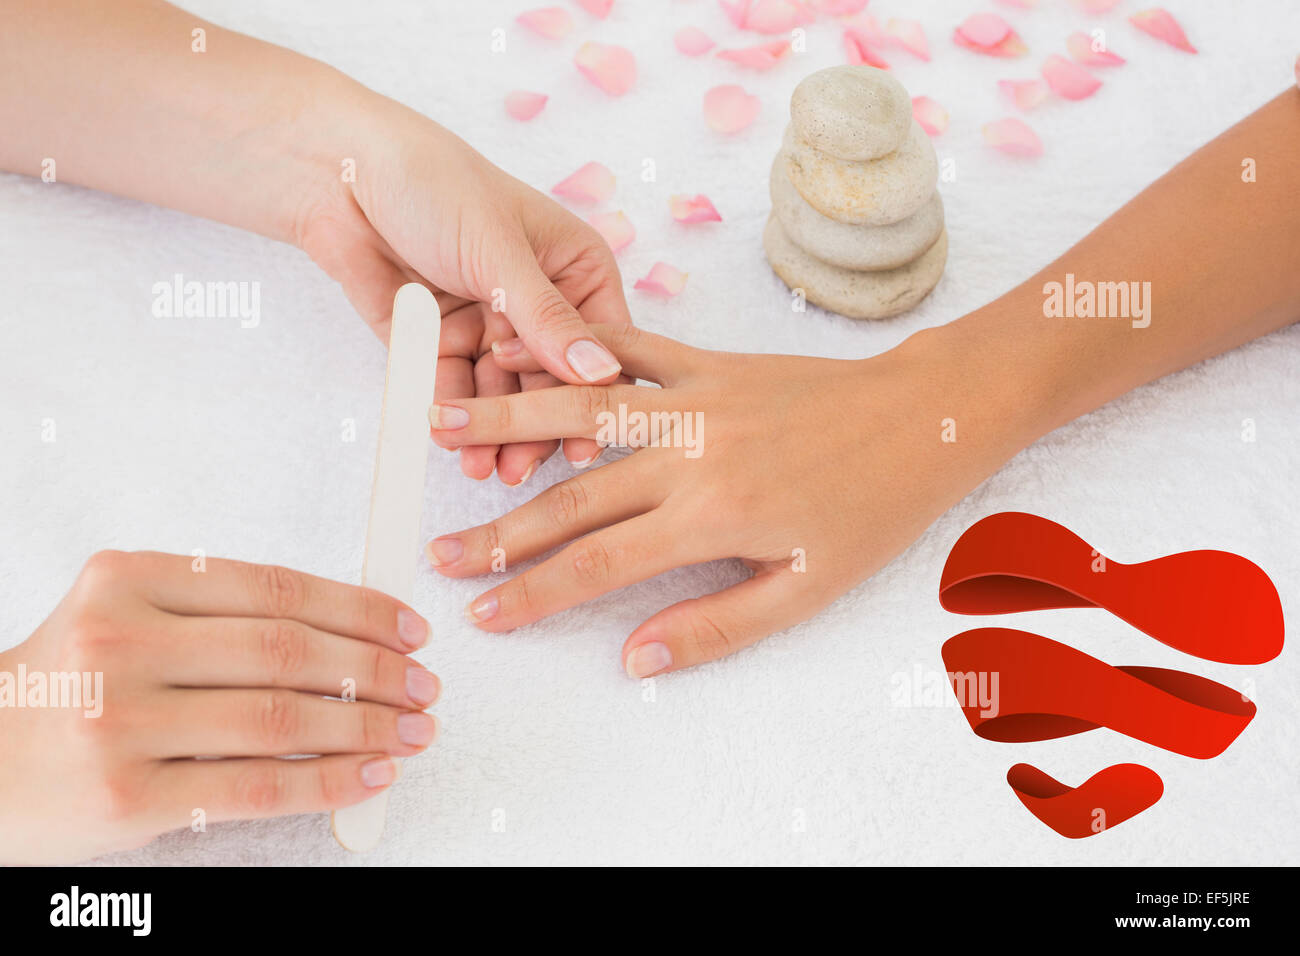 Composite image of nail technician filing customers nails Stock Photo